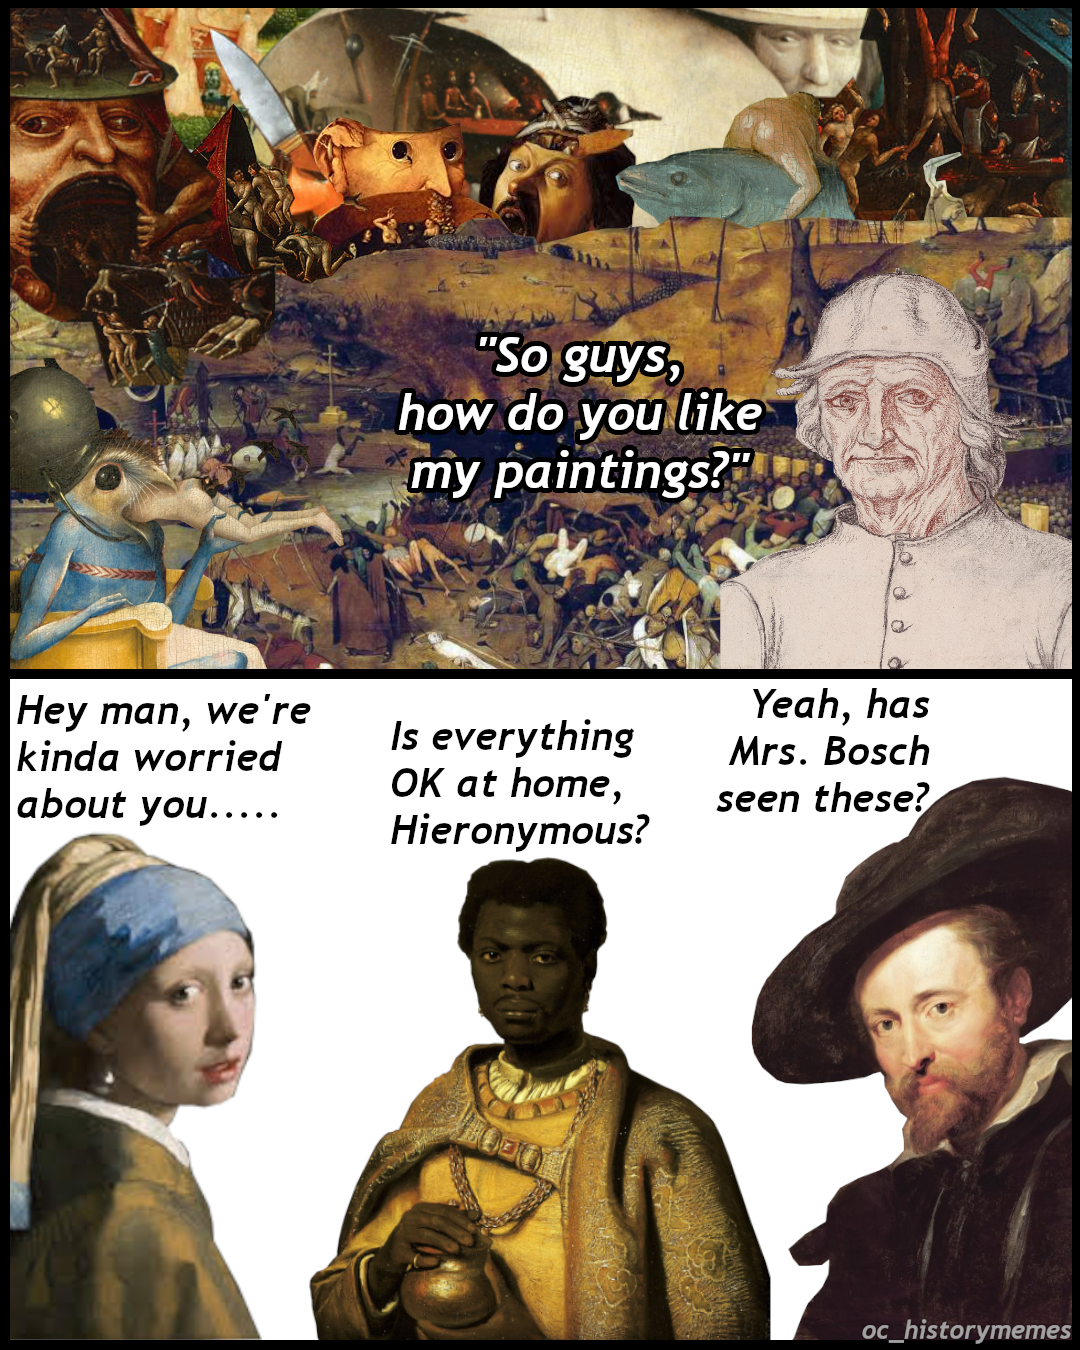 triumph of death - "So guys, how do you my paintings?" Hey man, we're kinda worried about you..... Is everything Ok at home, Hieronymous? Yeah, has Mrs. Bosch seen these? oc_historymemes